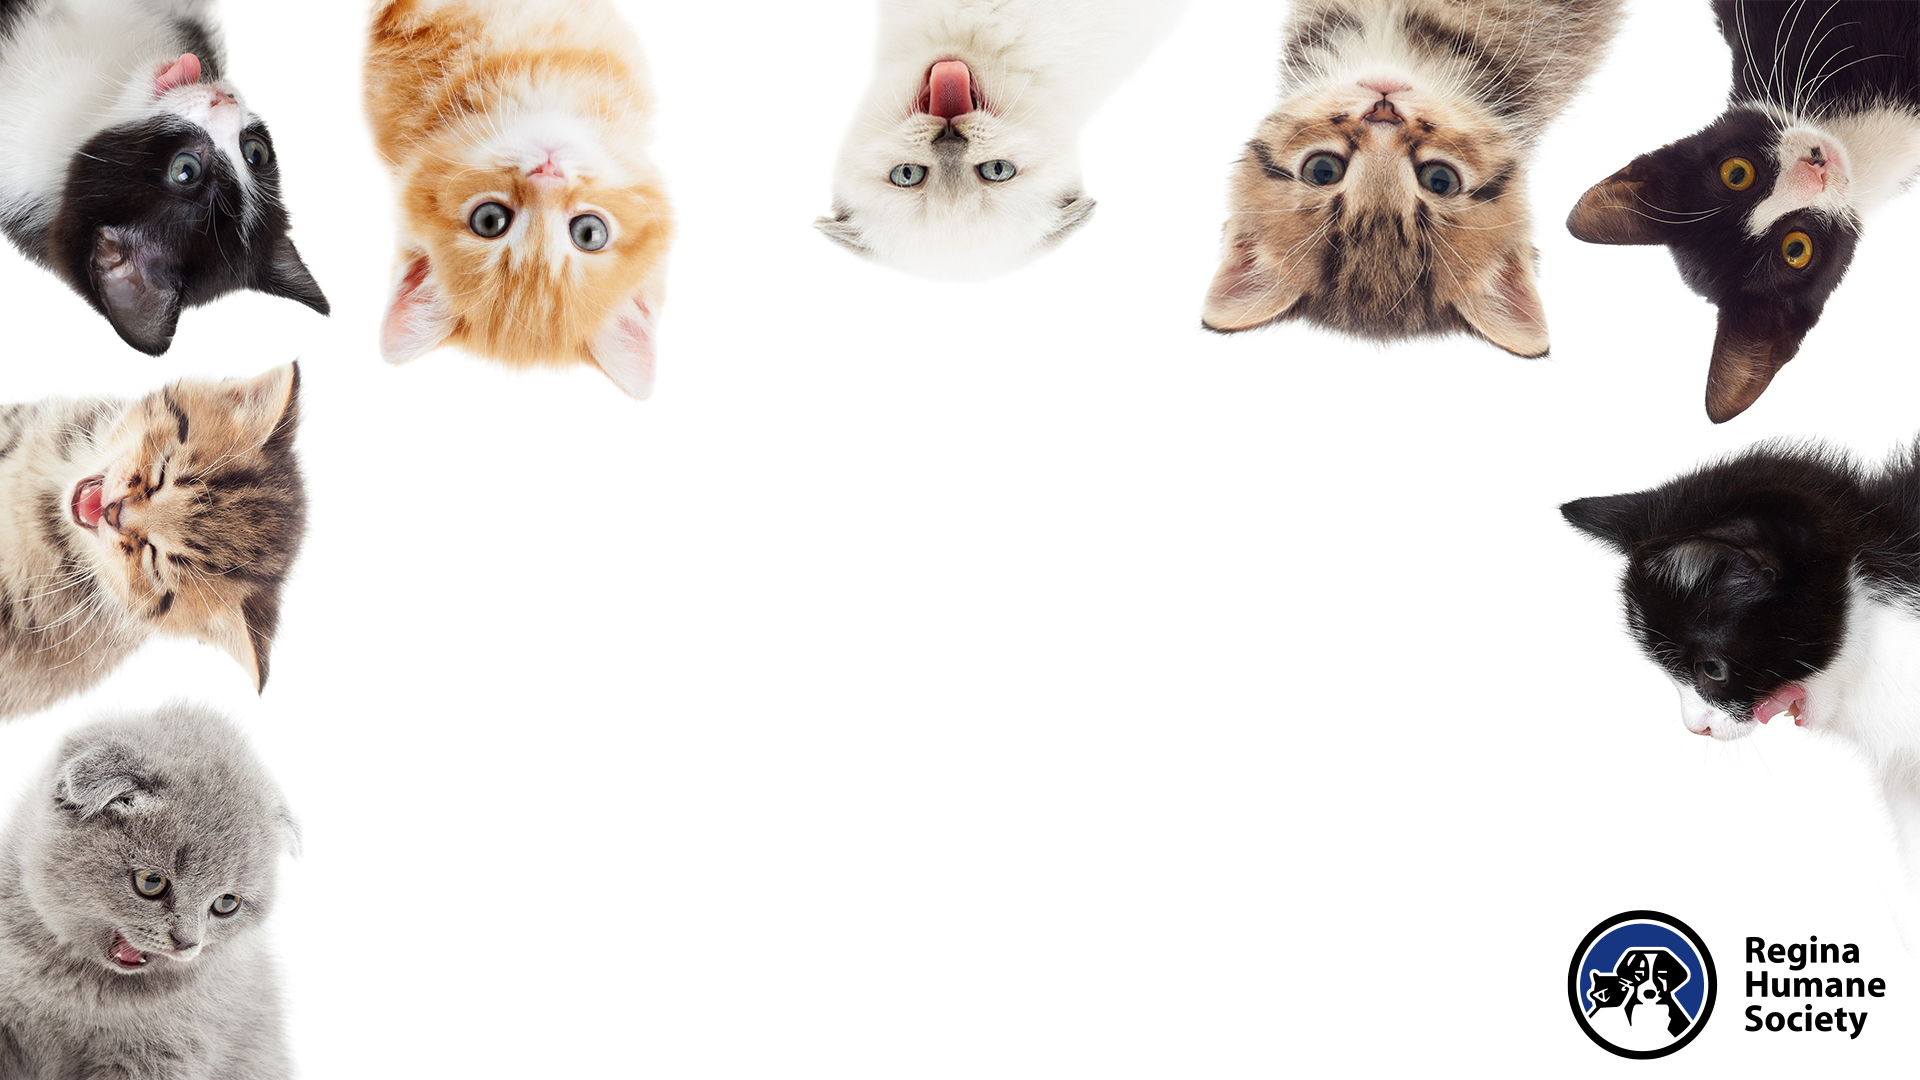 Video Conference Backgrounds - Regina Humane Society Inc